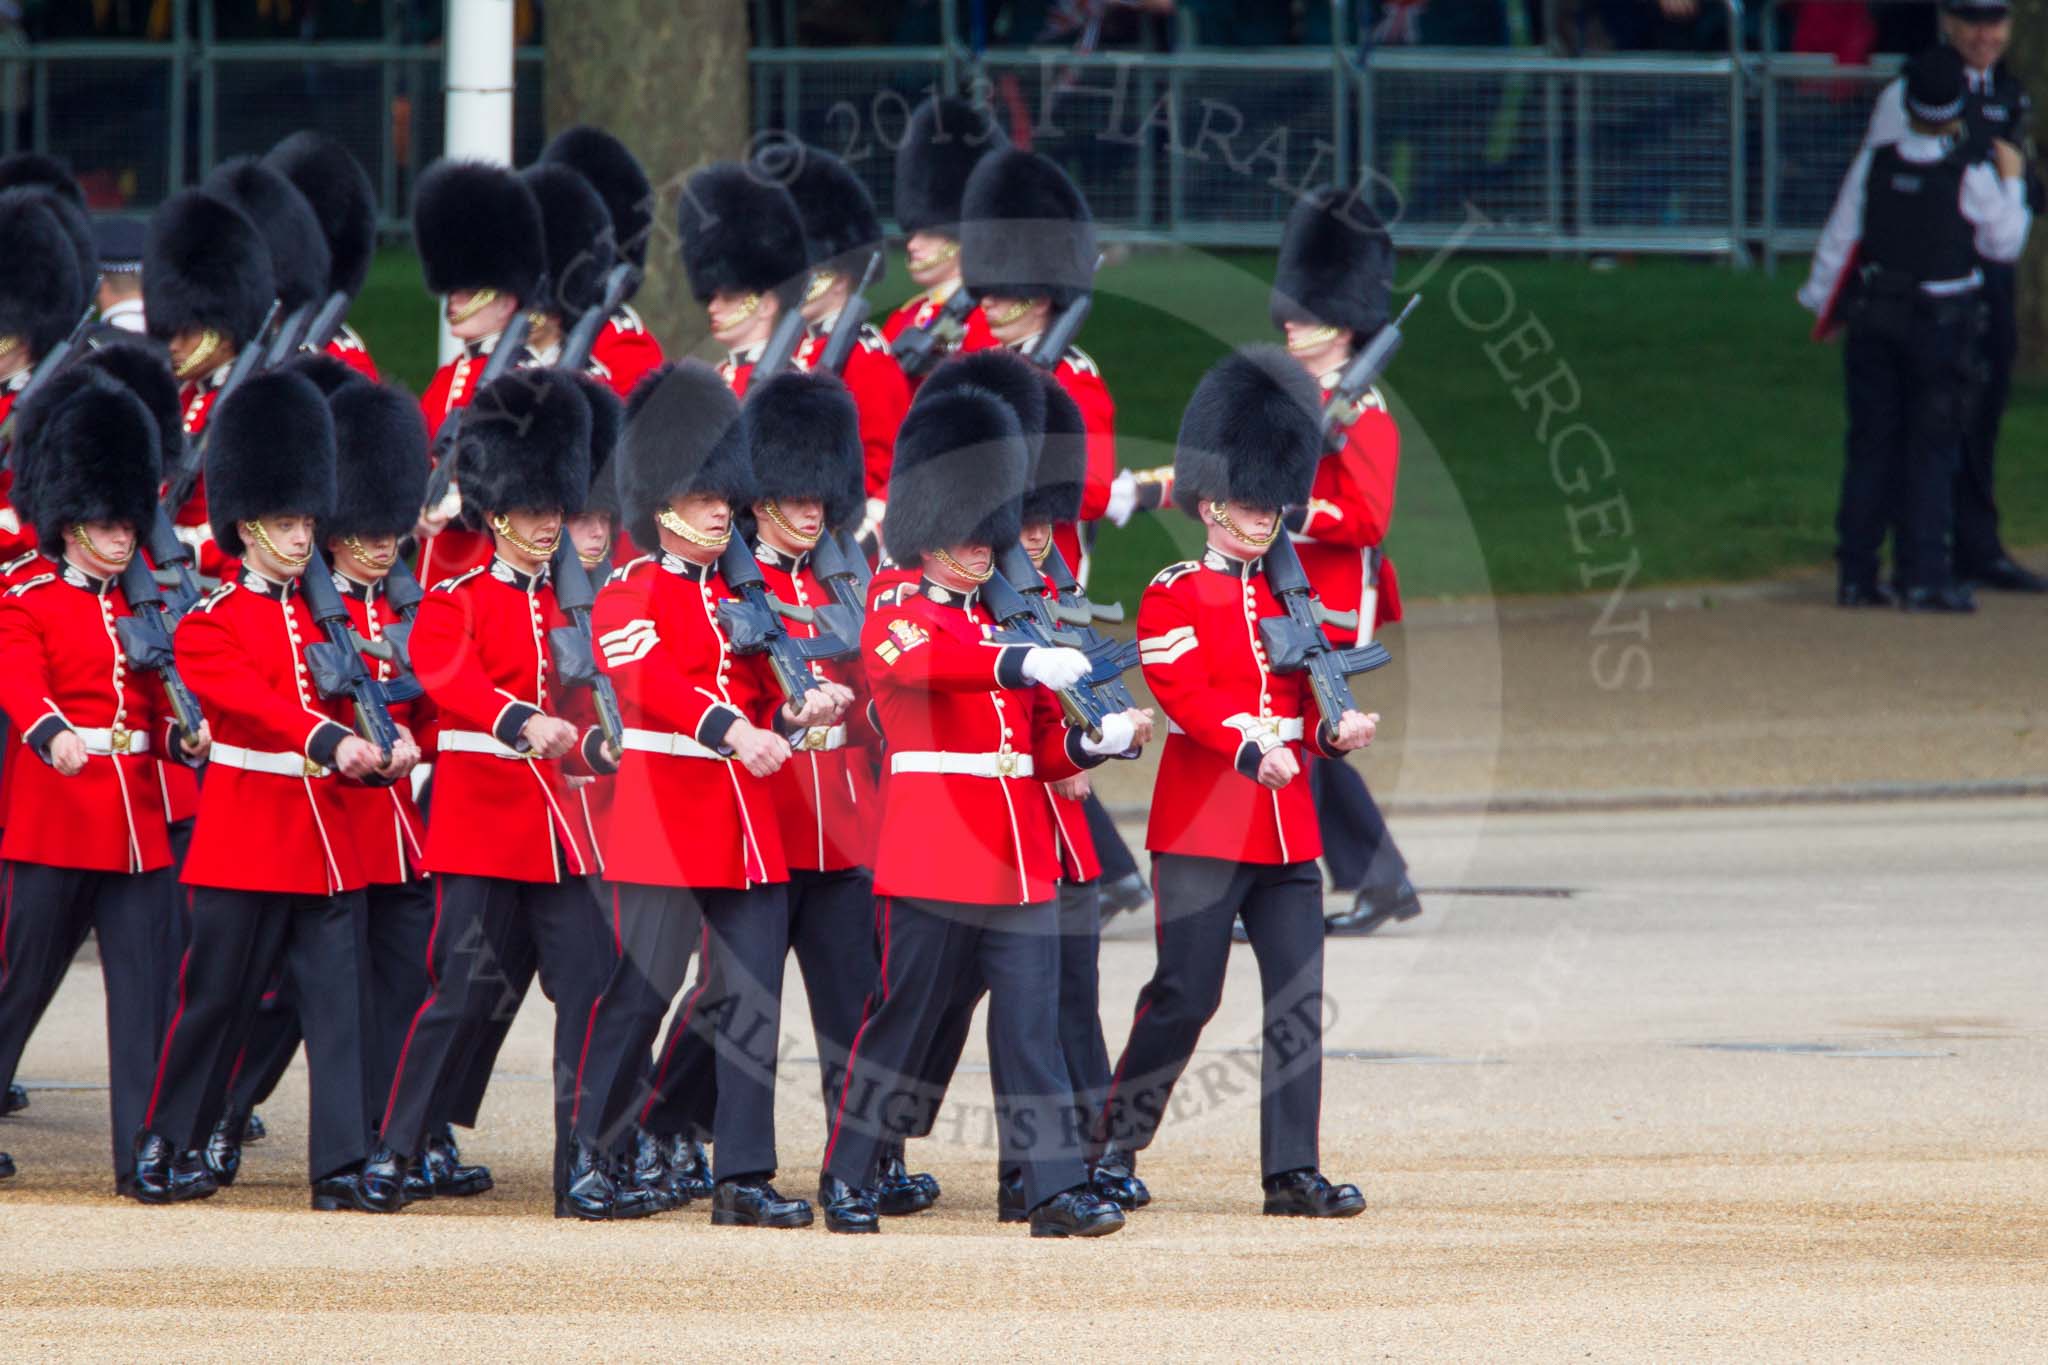 The Colonel's Review 2013: No. 5 Guard, F Company Scots Guards, marching into position on Horse Guards Parade..
Horse Guards Parade, Westminster,
London SW1,

United Kingdom,
on 08 June 2013 at 10:25, image #89